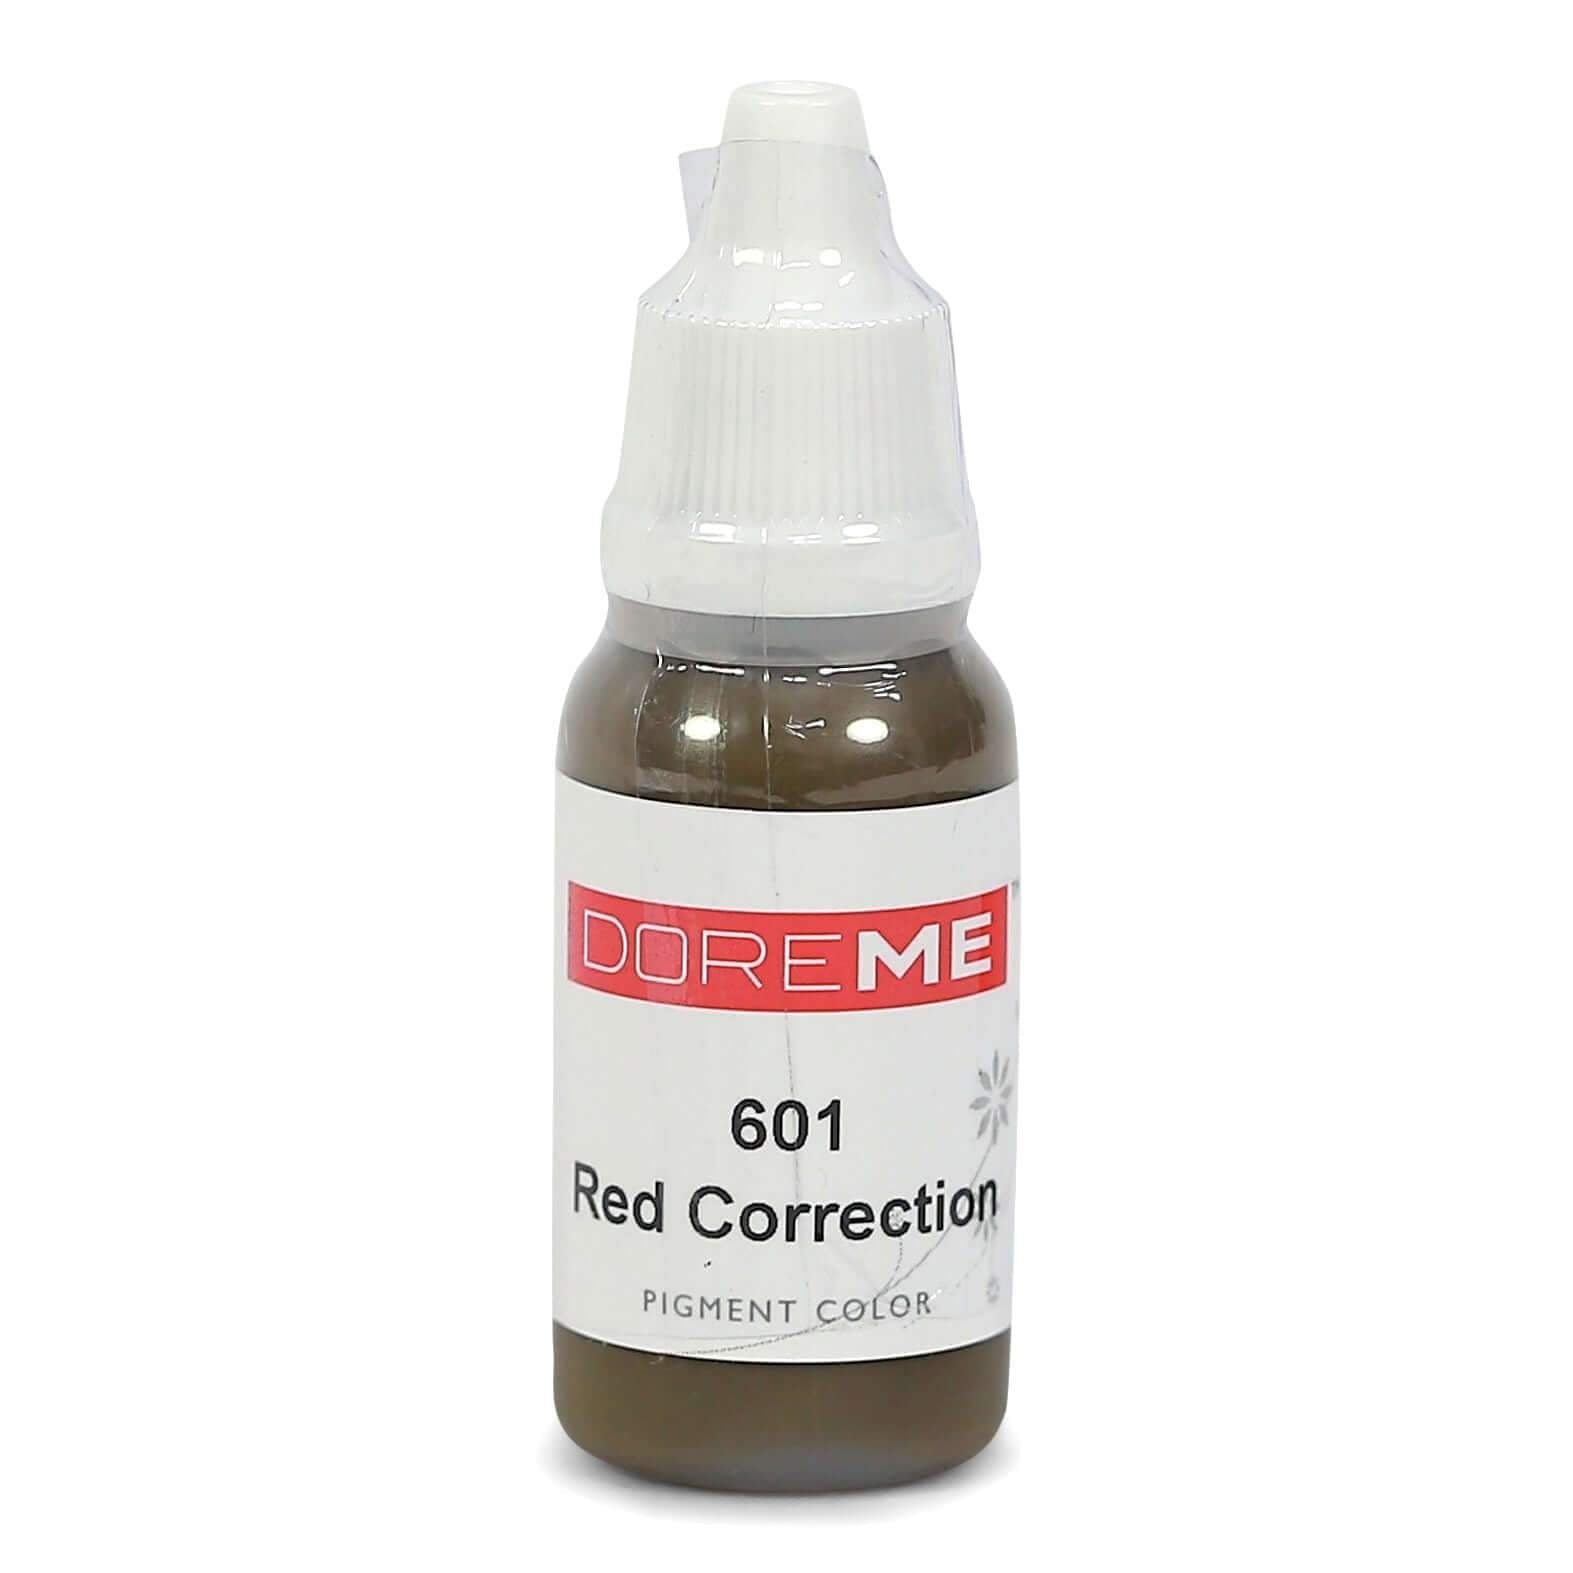 Permanent Makeup pigments Doreme Micropigmentation Correction Colours 601 Red Correction (c) - Beautiful Ink UK trade and wholesale supplier